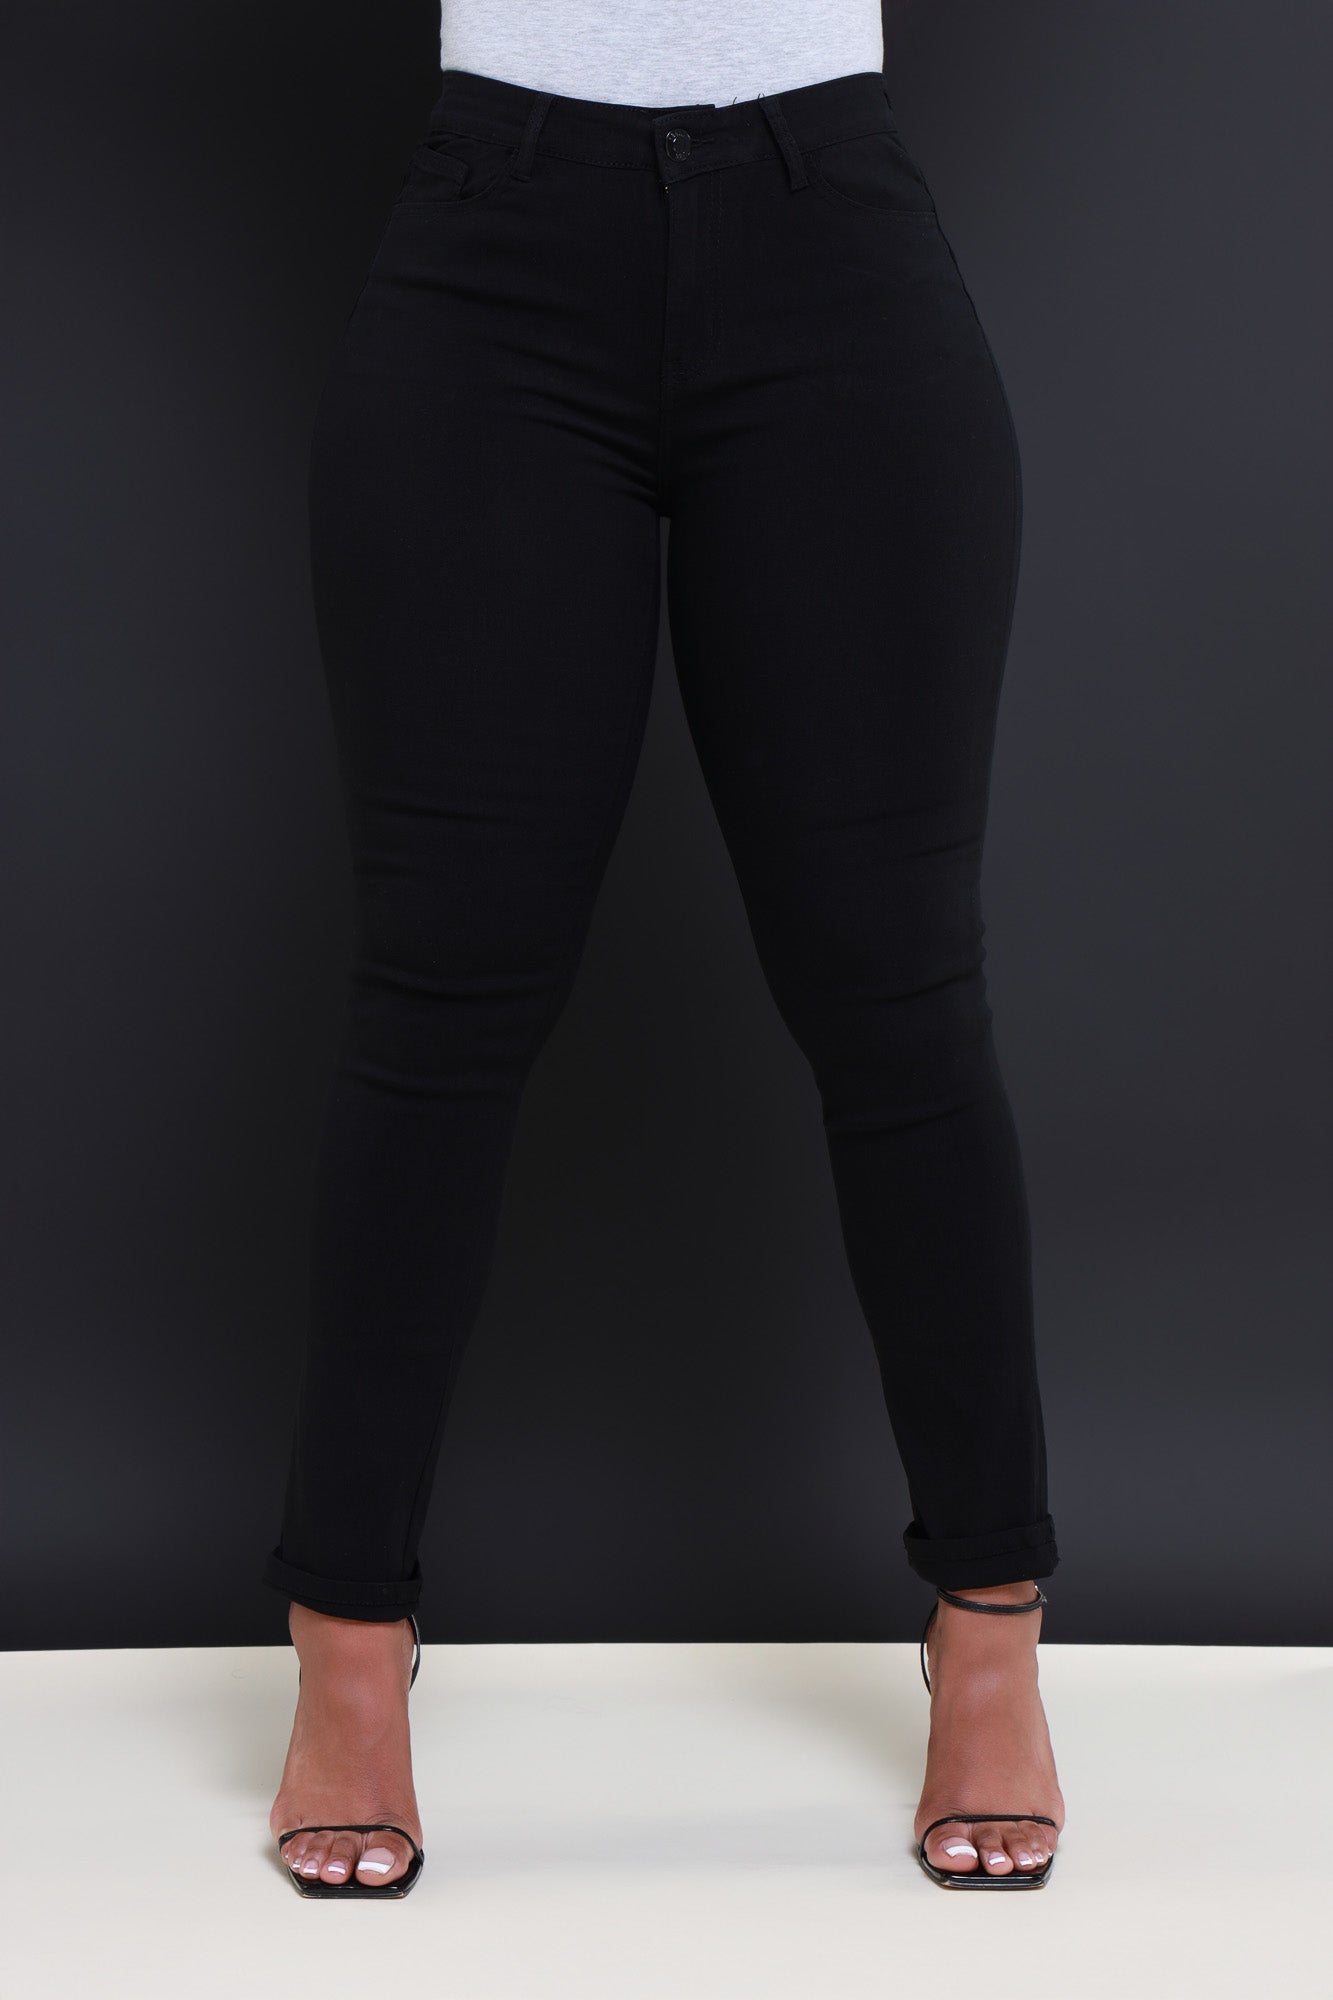 High waist Butt lifting Shaping jeans/Jeggings - Black Wash Black  stitching- Shop Now – Shape Wear Shop